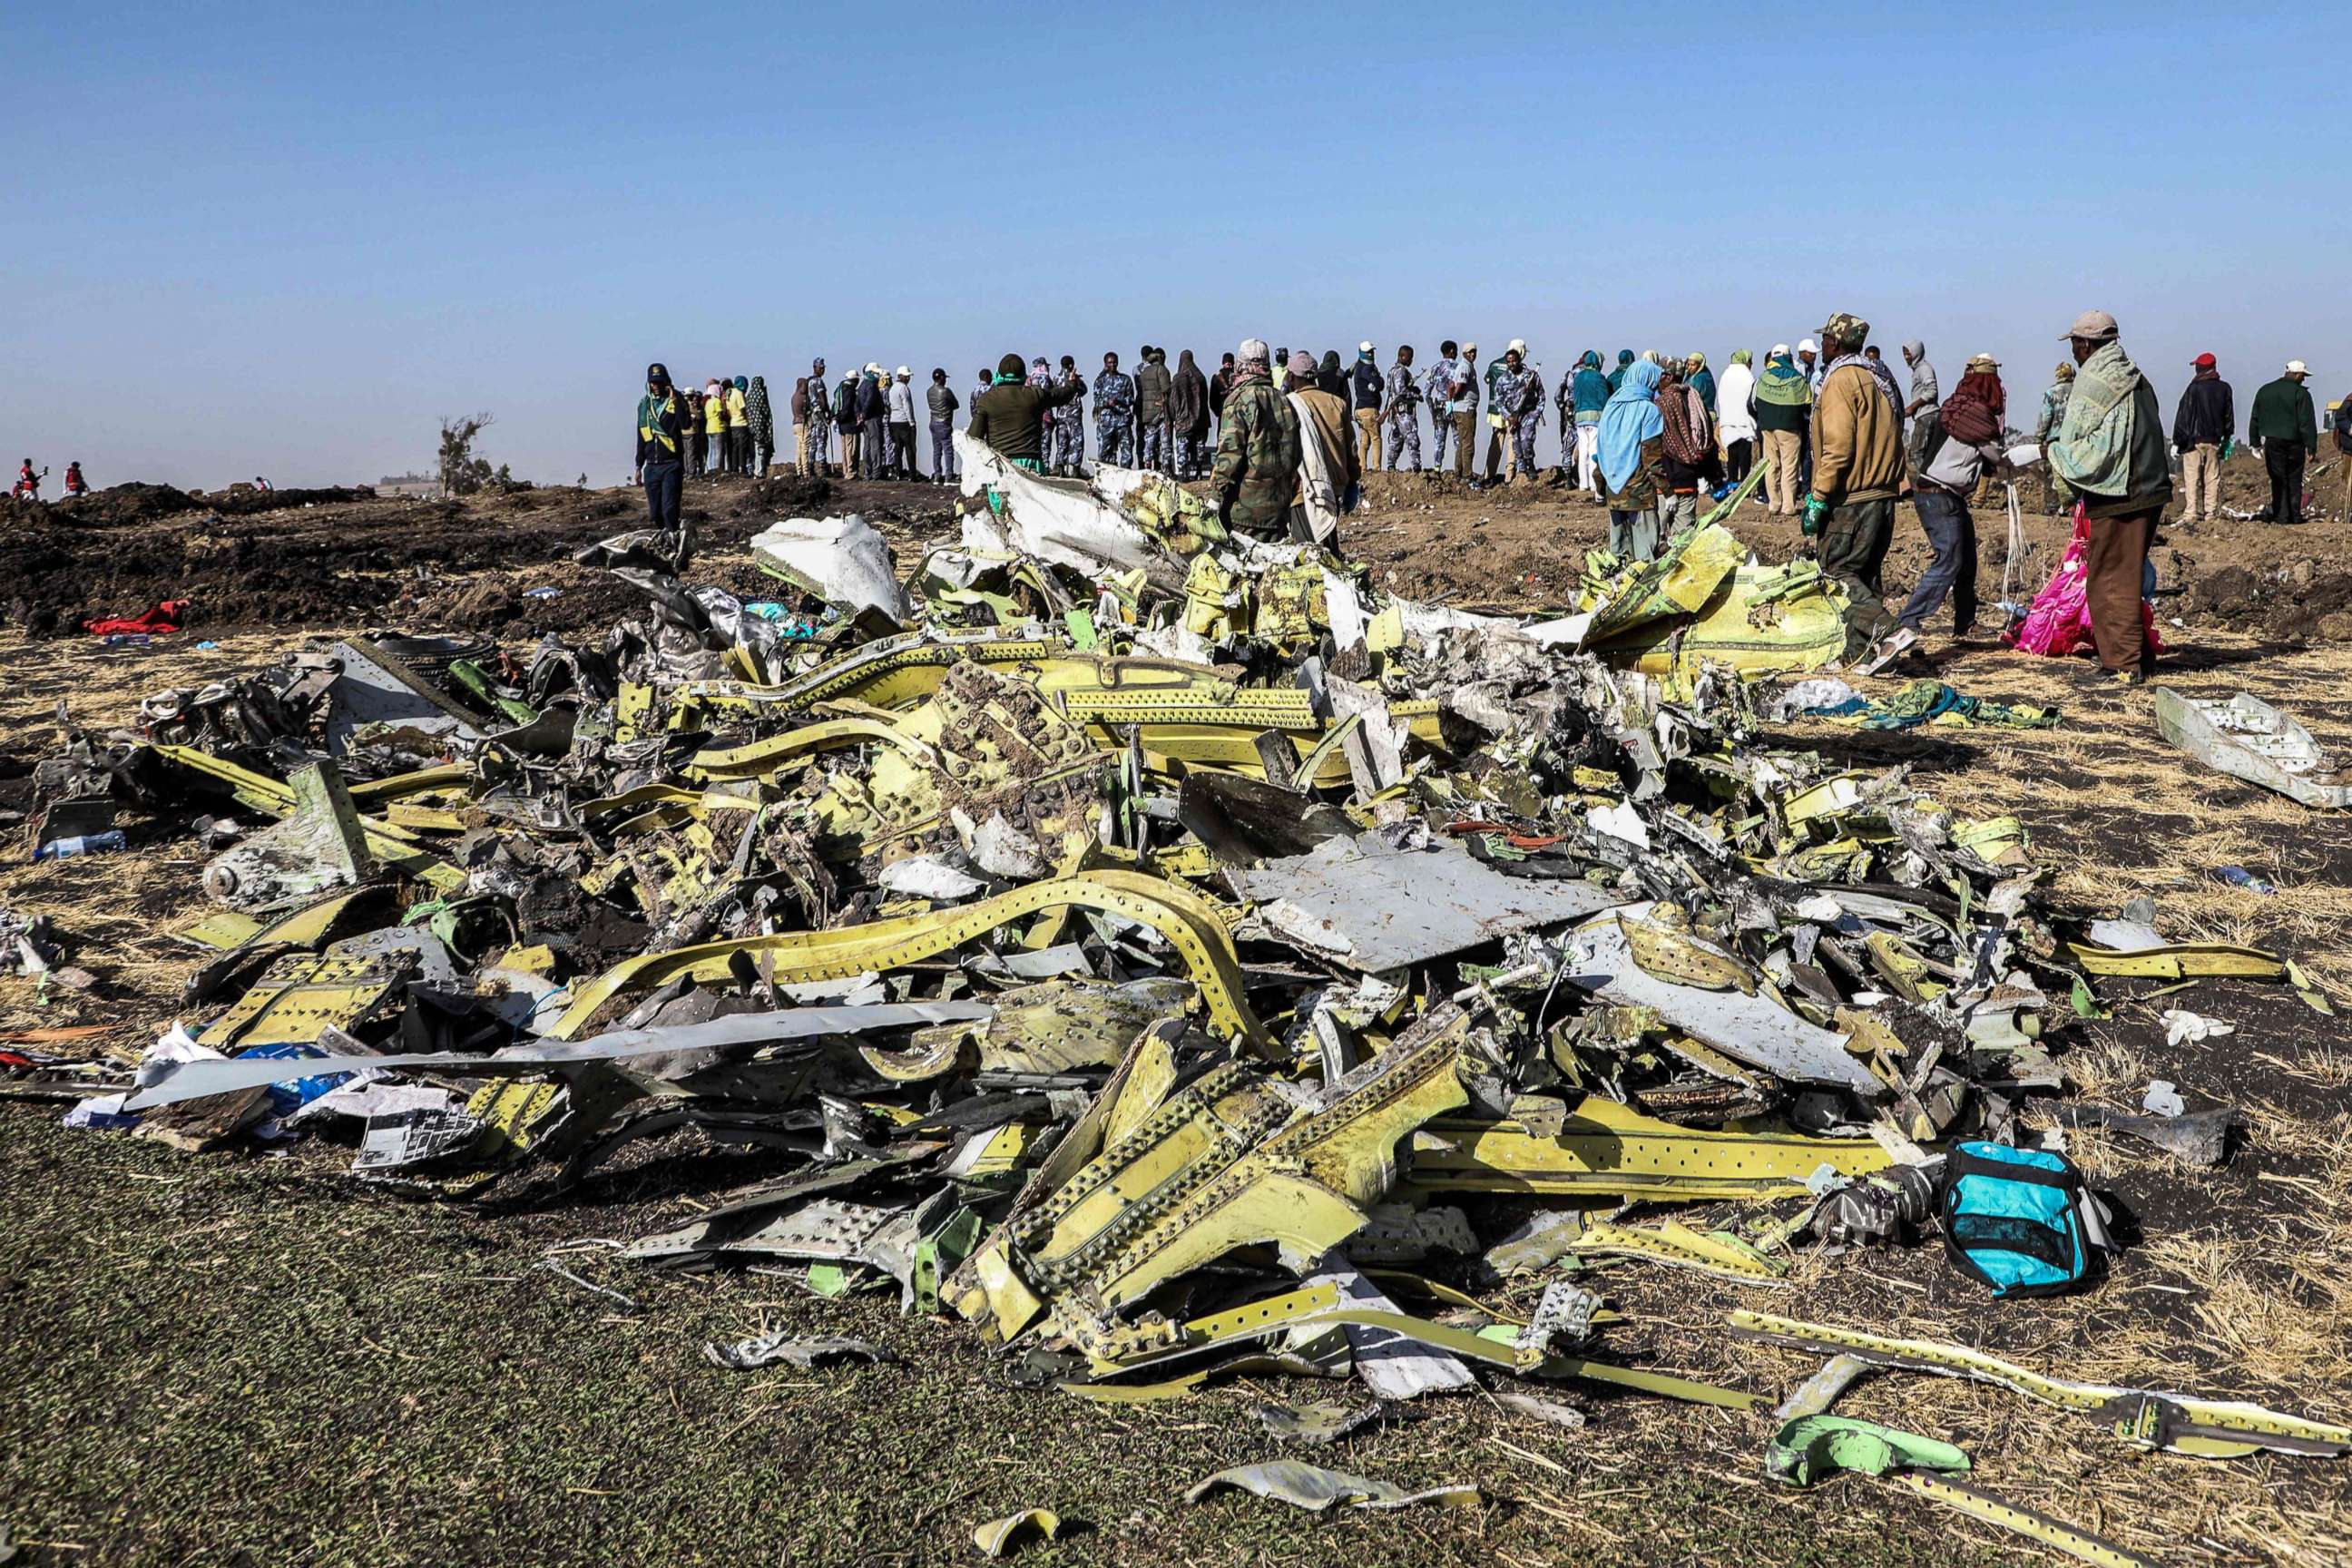 PHOTO: People stand near collected debris at the crash site of Ethiopia Airlines near Bishoftu, southeast of Addis Ababa, Ethiopia, March 11, 2019. 